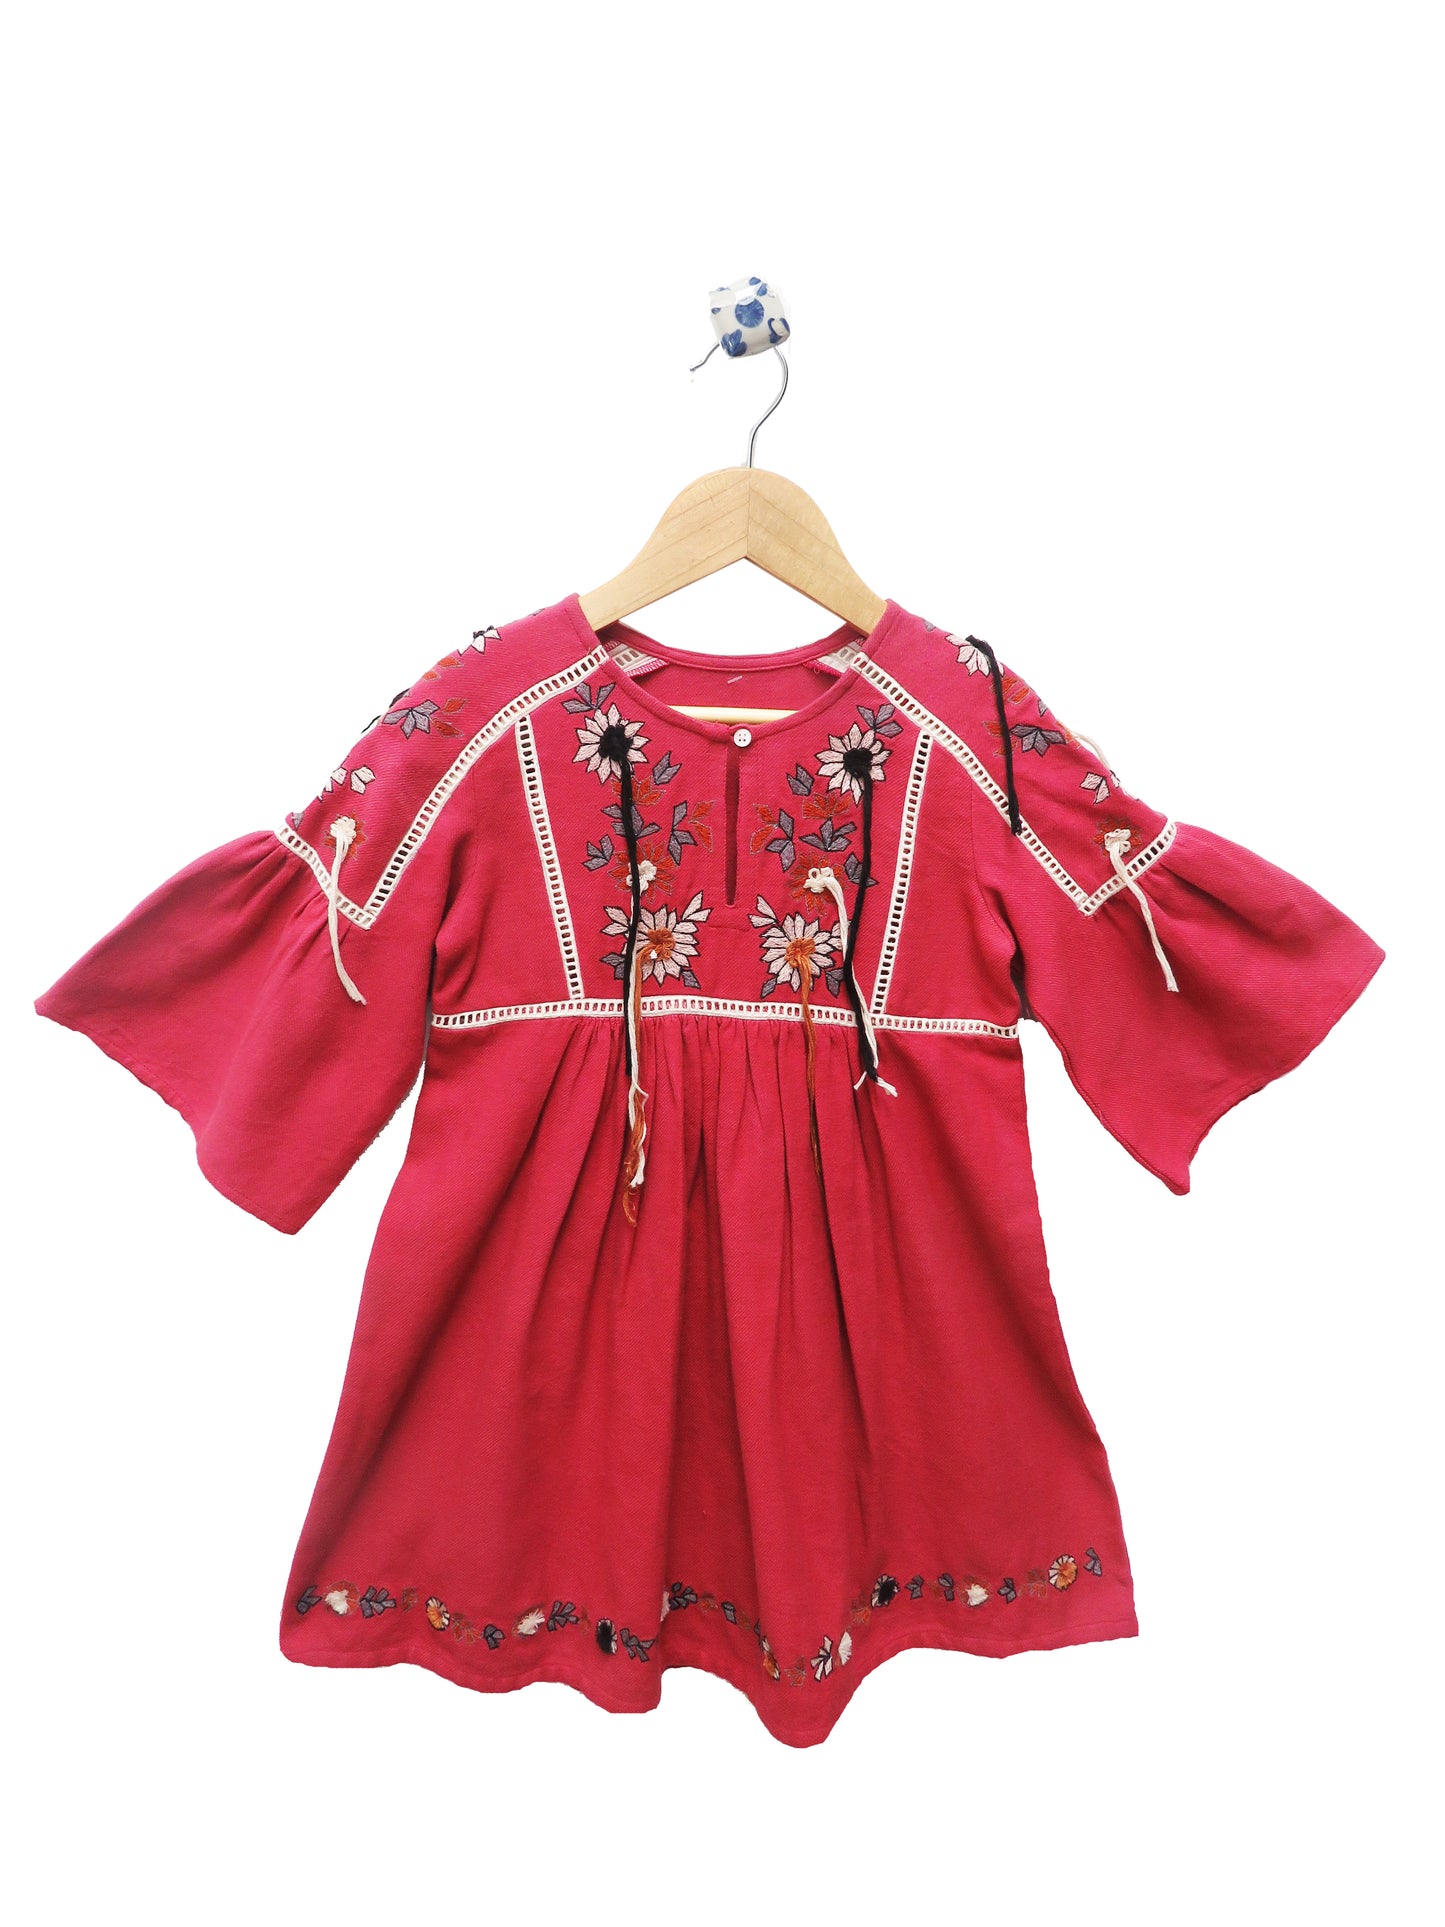 Red Top With Chic Butterfly Sleeves And A Beautiful Floral Embroidery